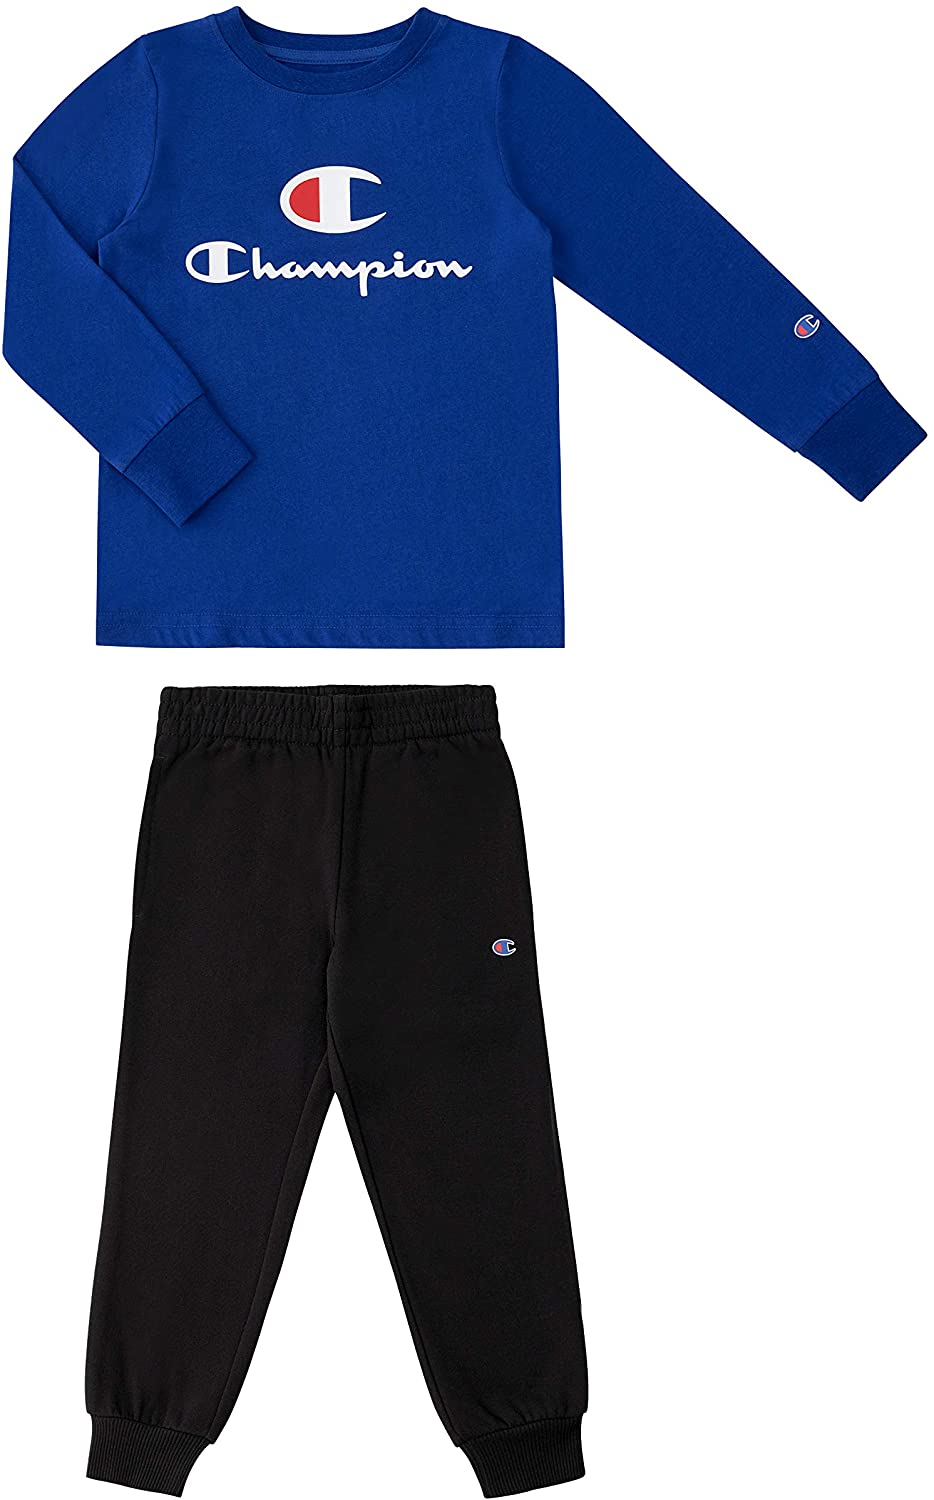 Champion Kids Boys Long Sleeve Hooded and Crew Neck Tee Shirt and Fleece Jogger Sweatpant 2 Piece Set Kids Clothes 